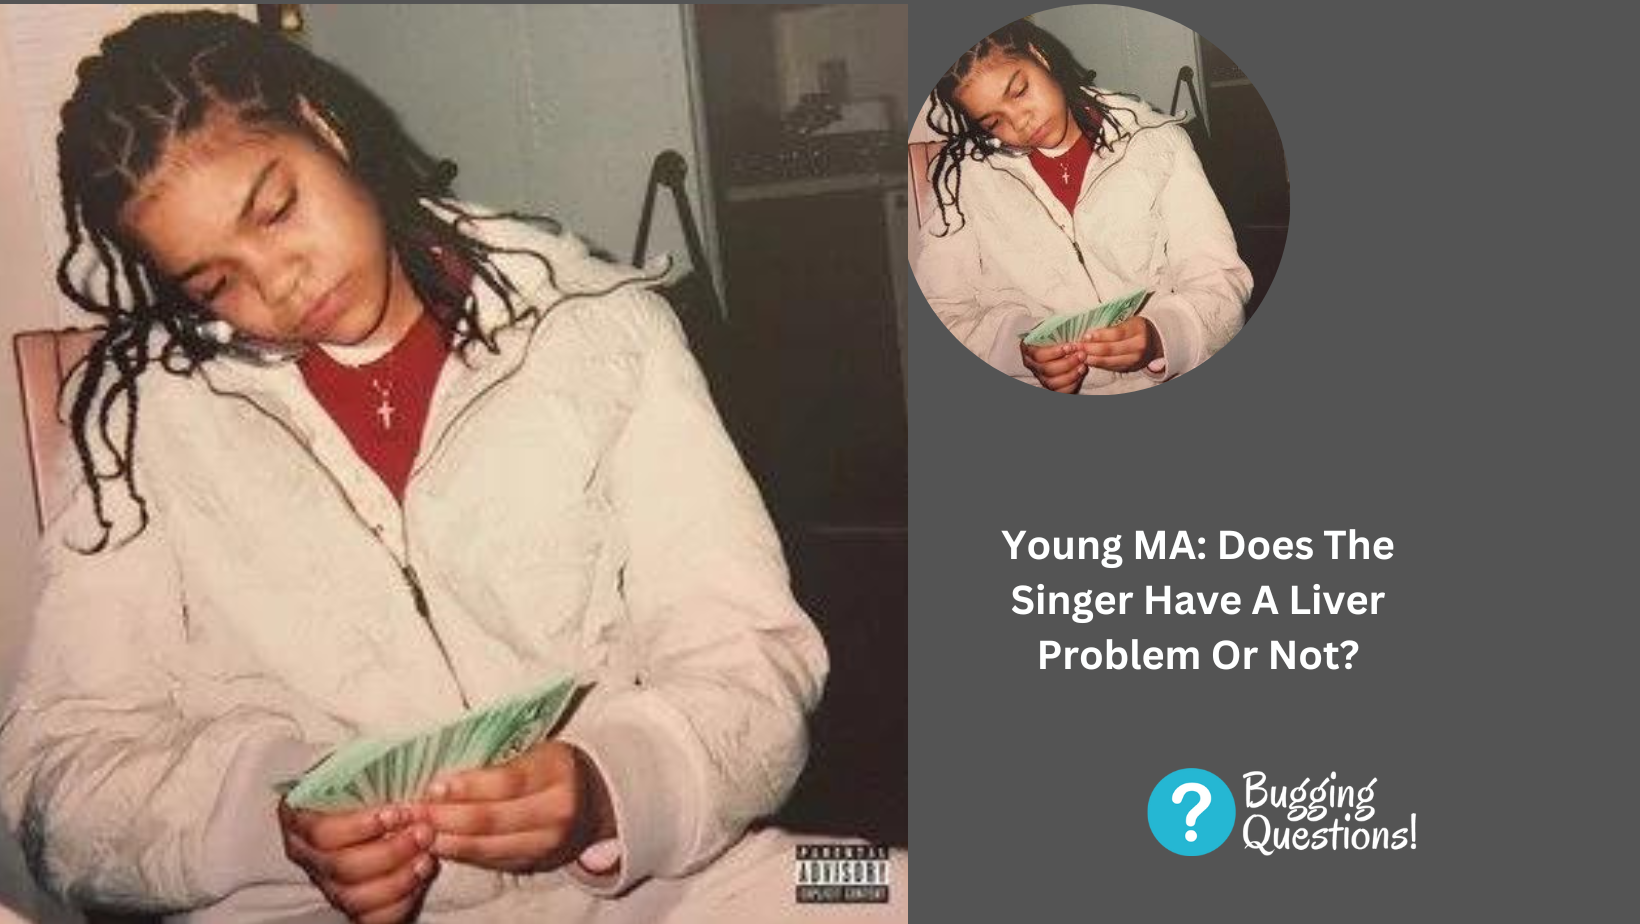 Young MA: Does The Singer Have A Liver Problem Or Not?